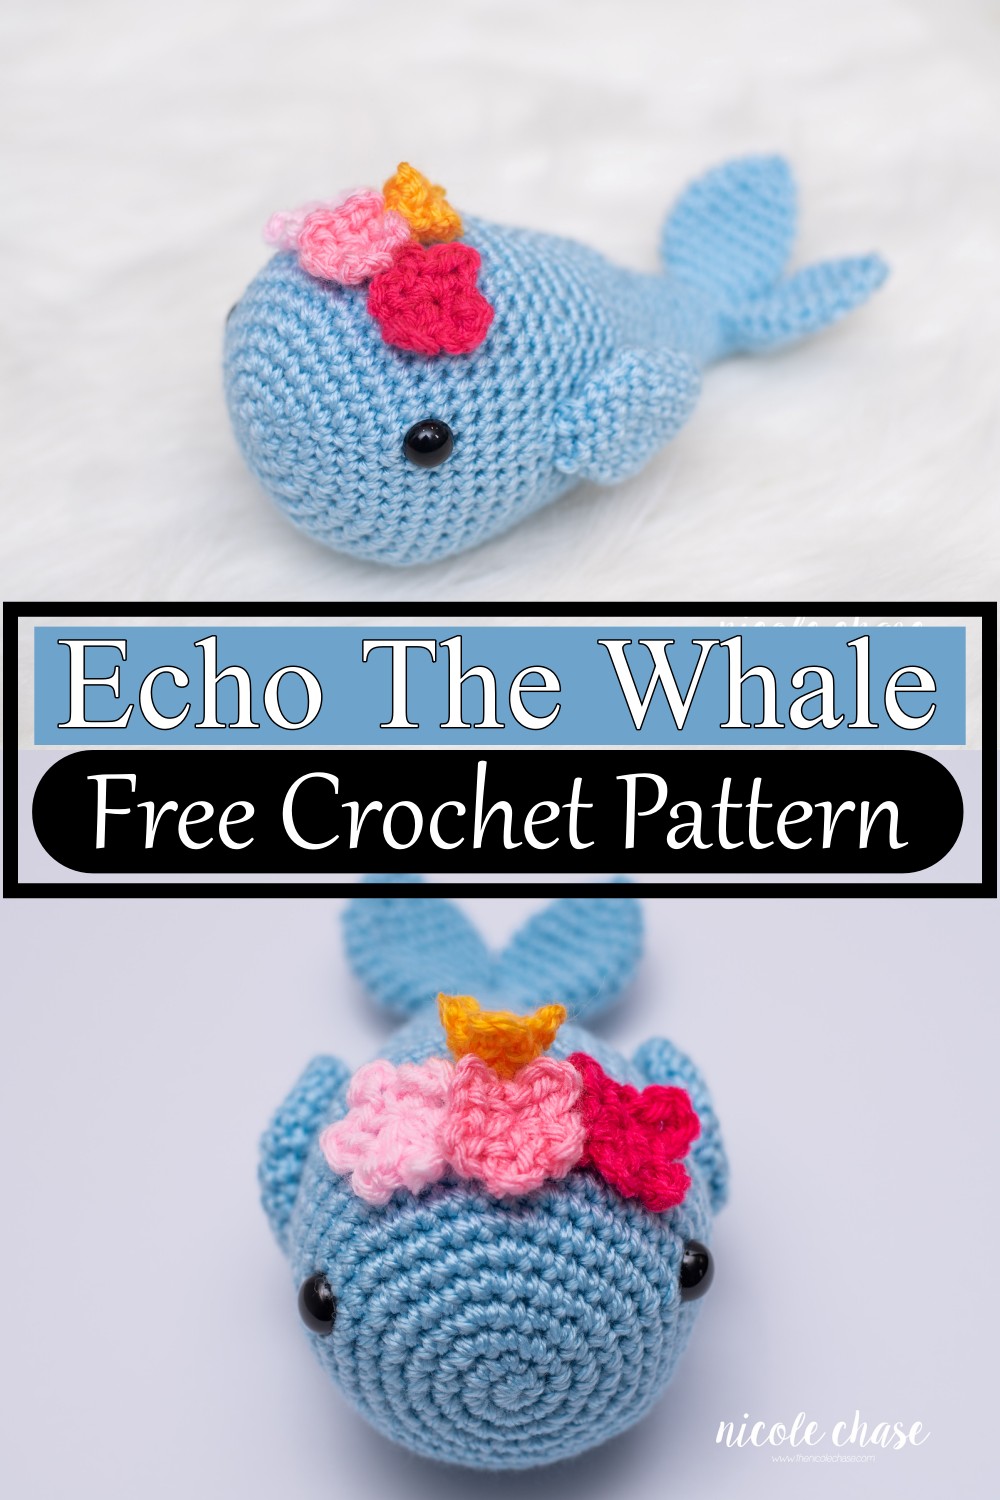 Echo The Whale